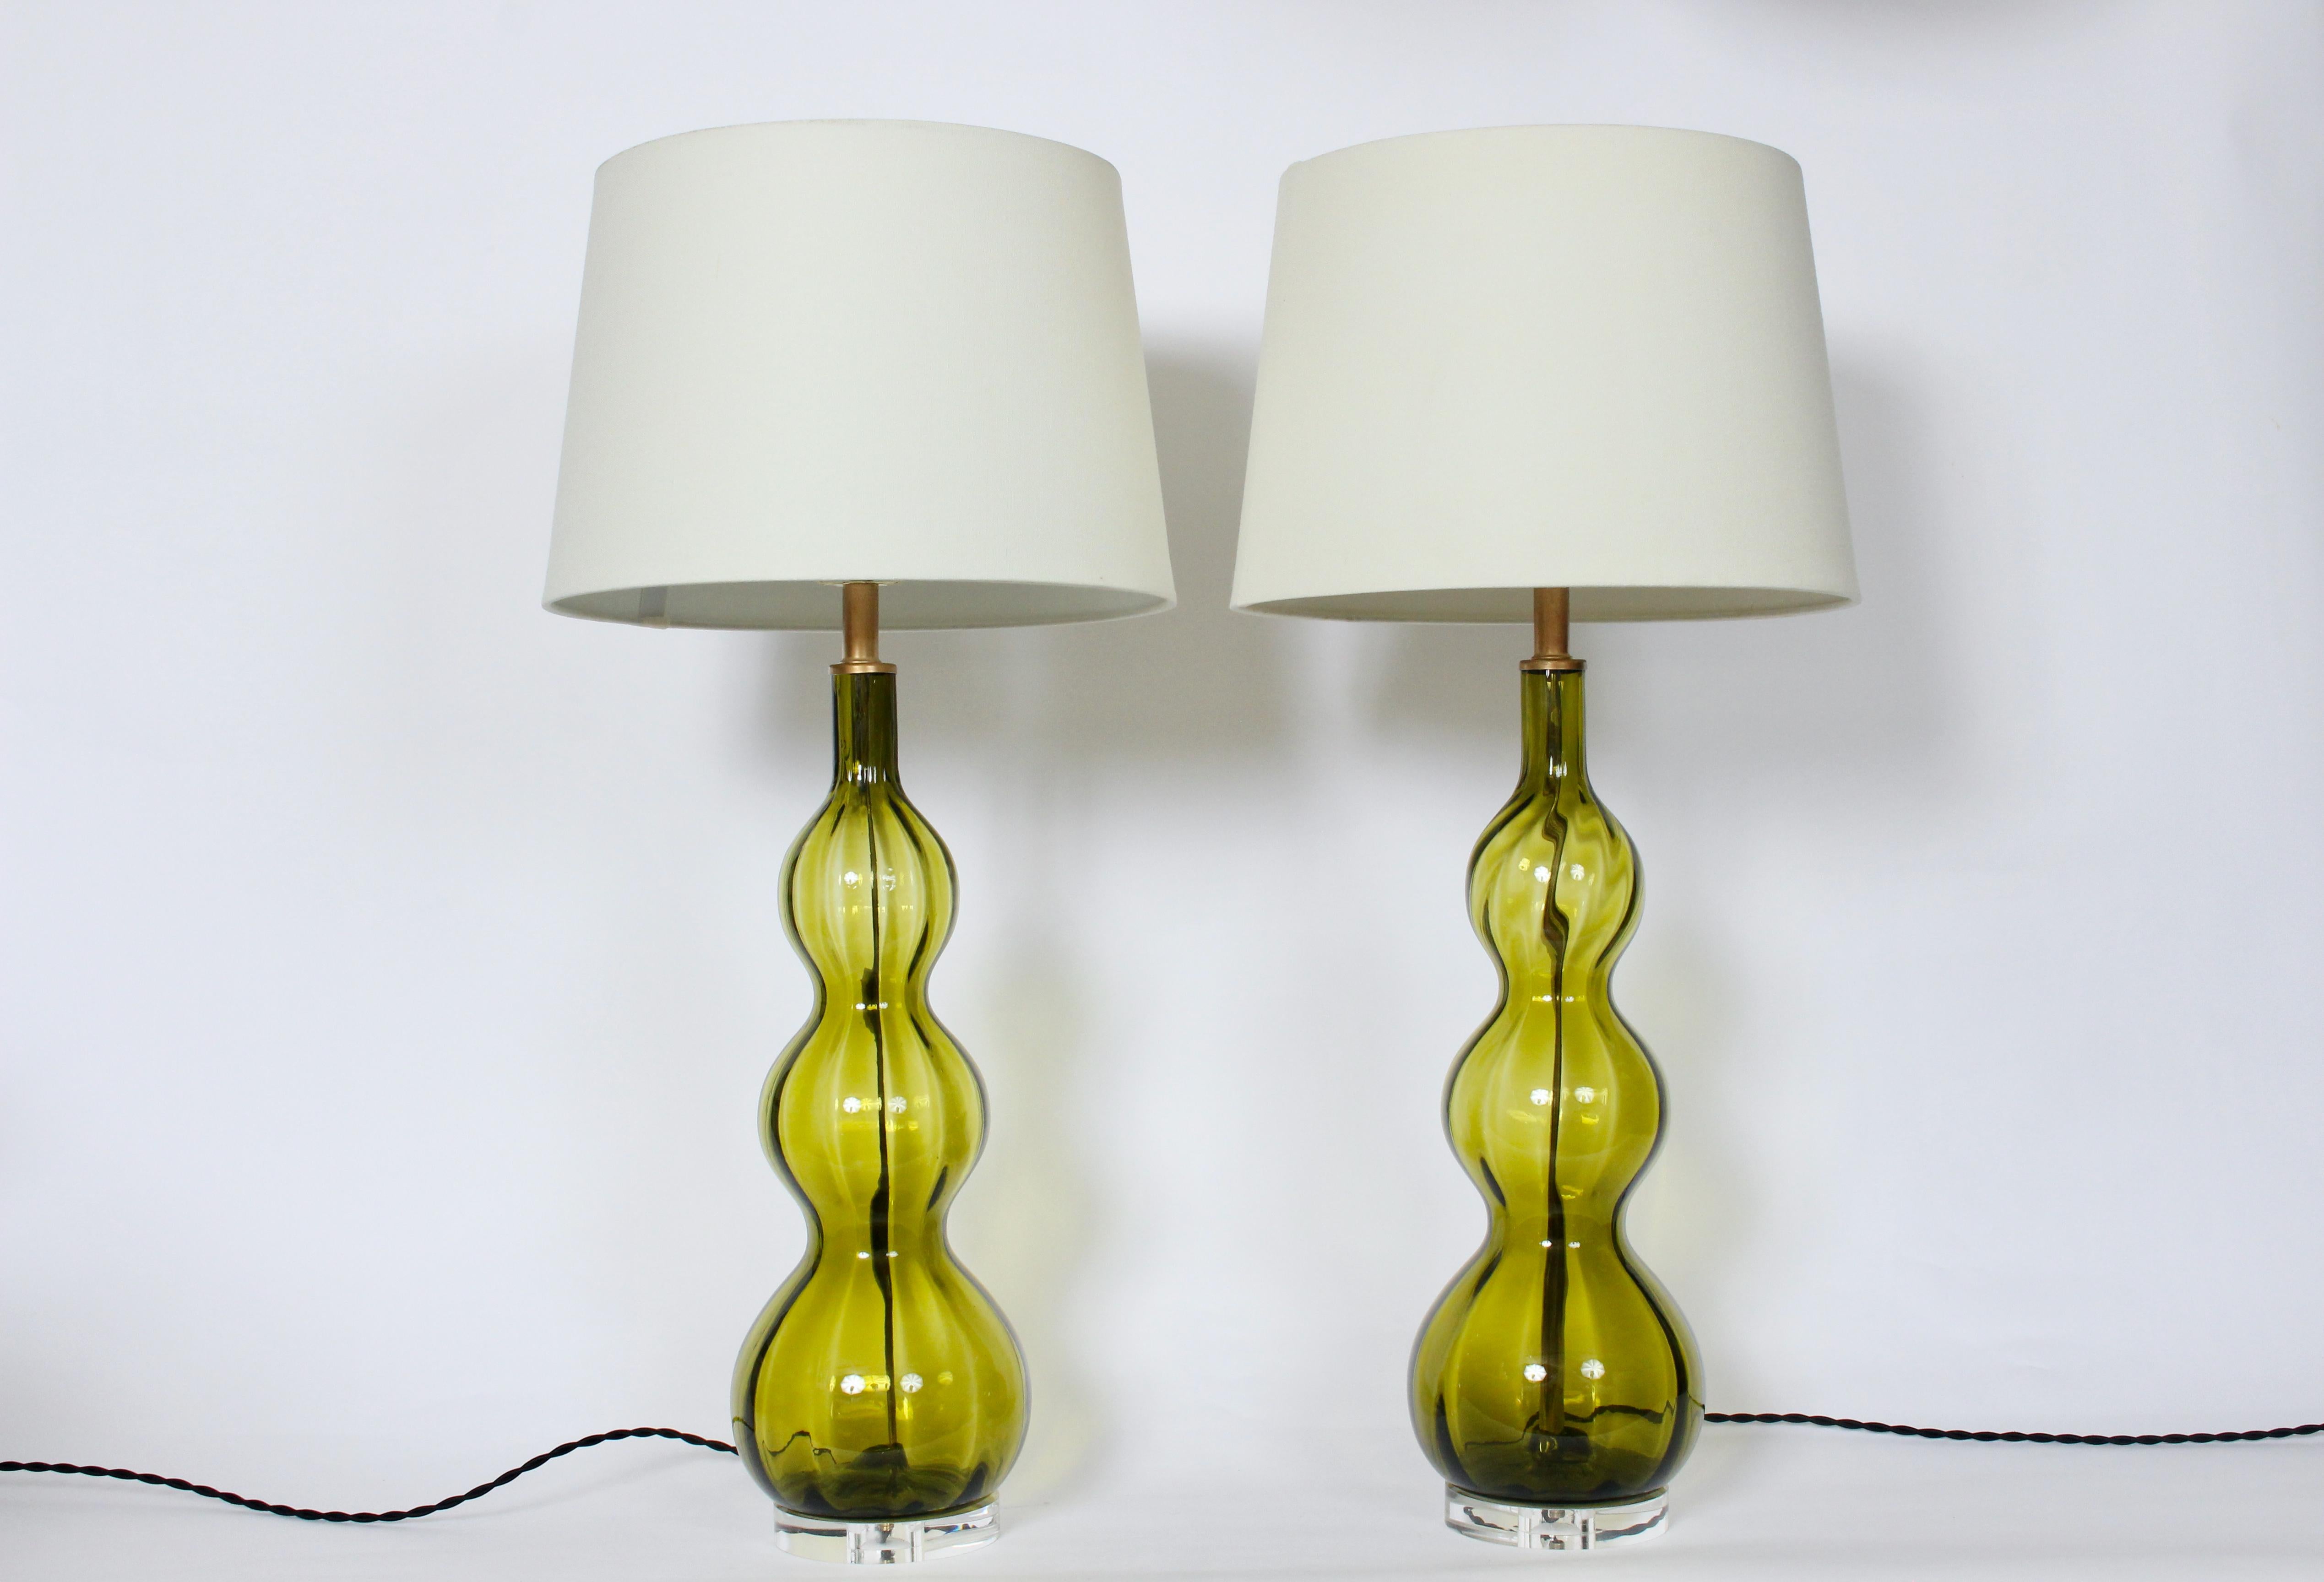 American Tall Pair of Stacked Triple Gourd Olive Green Art Glass Table Lamps, 1950s For Sale